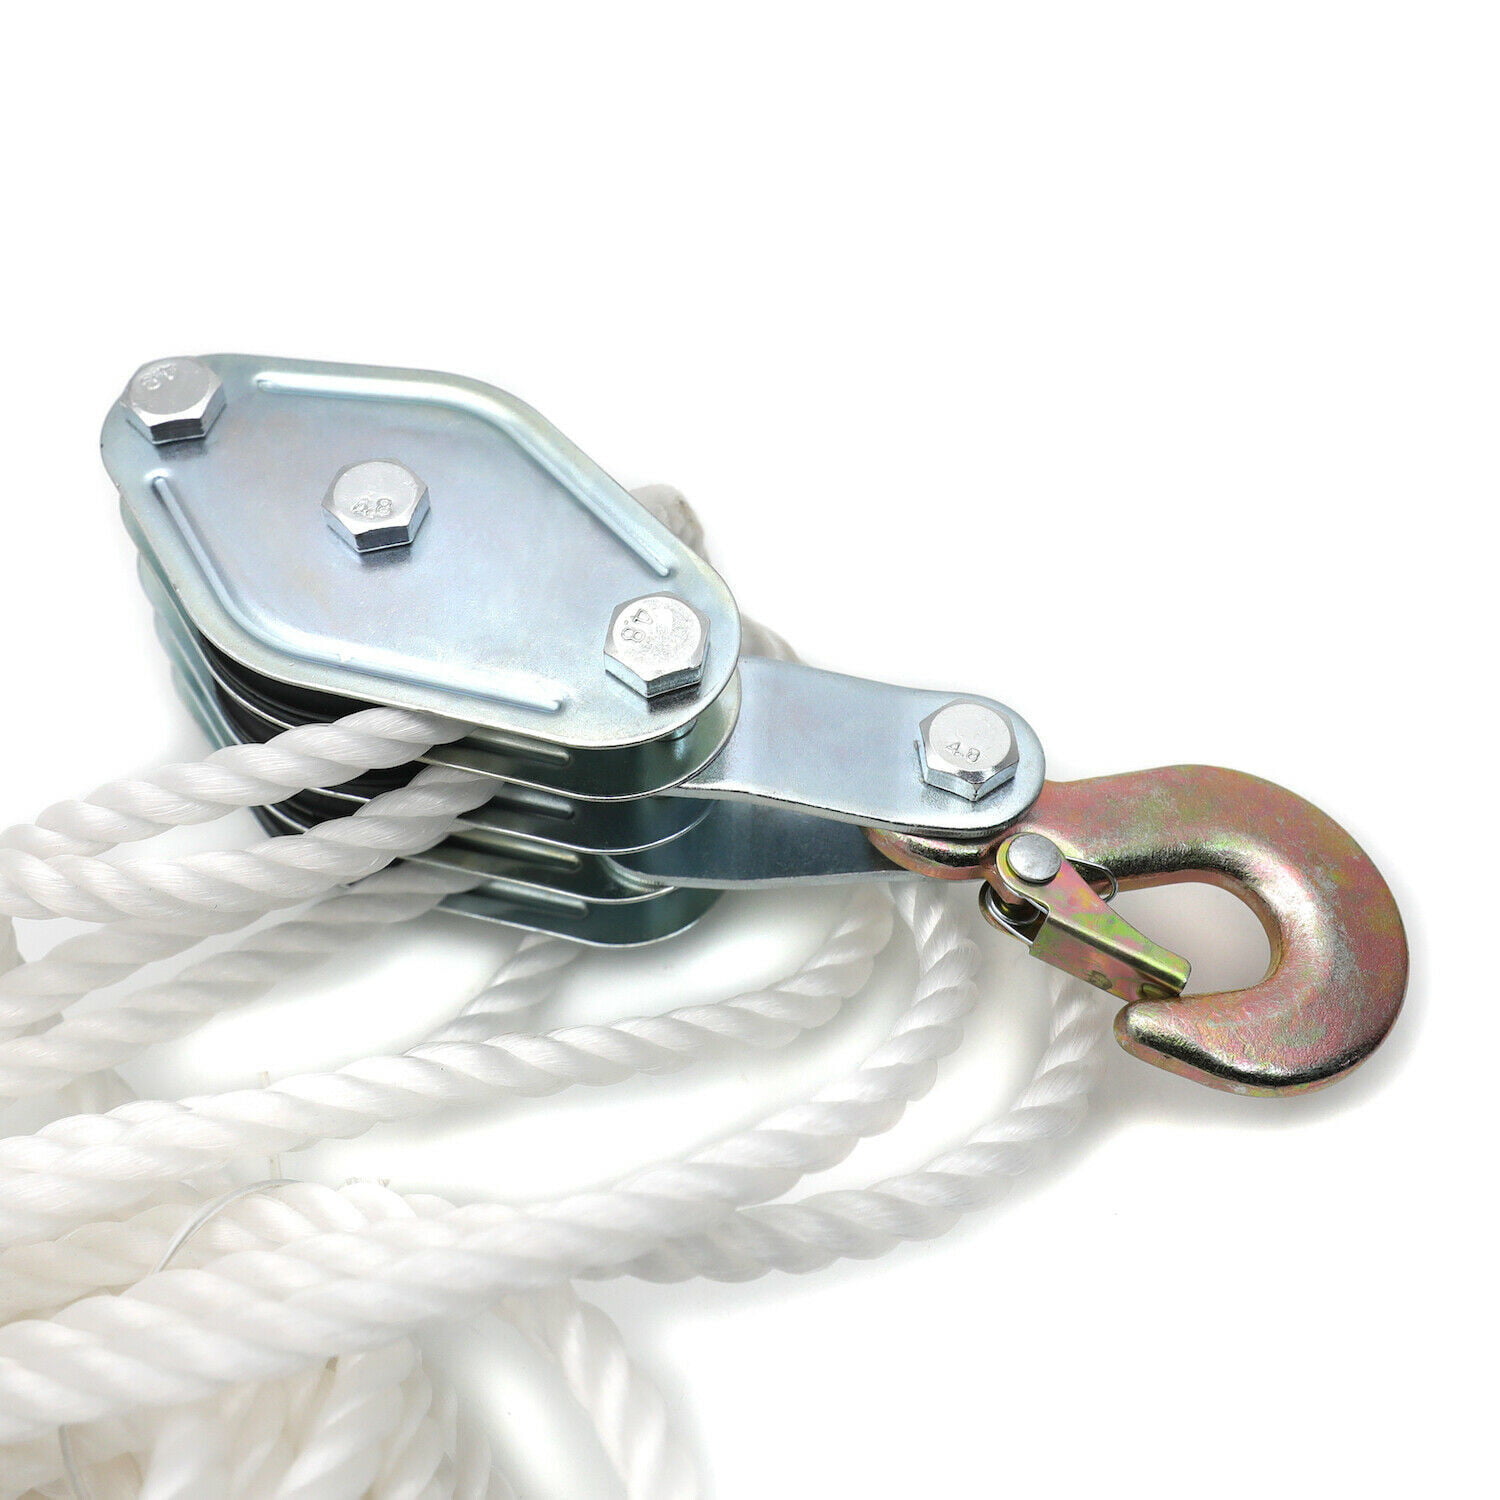 Generic Rope Pulley Block and Tackle Hoist 